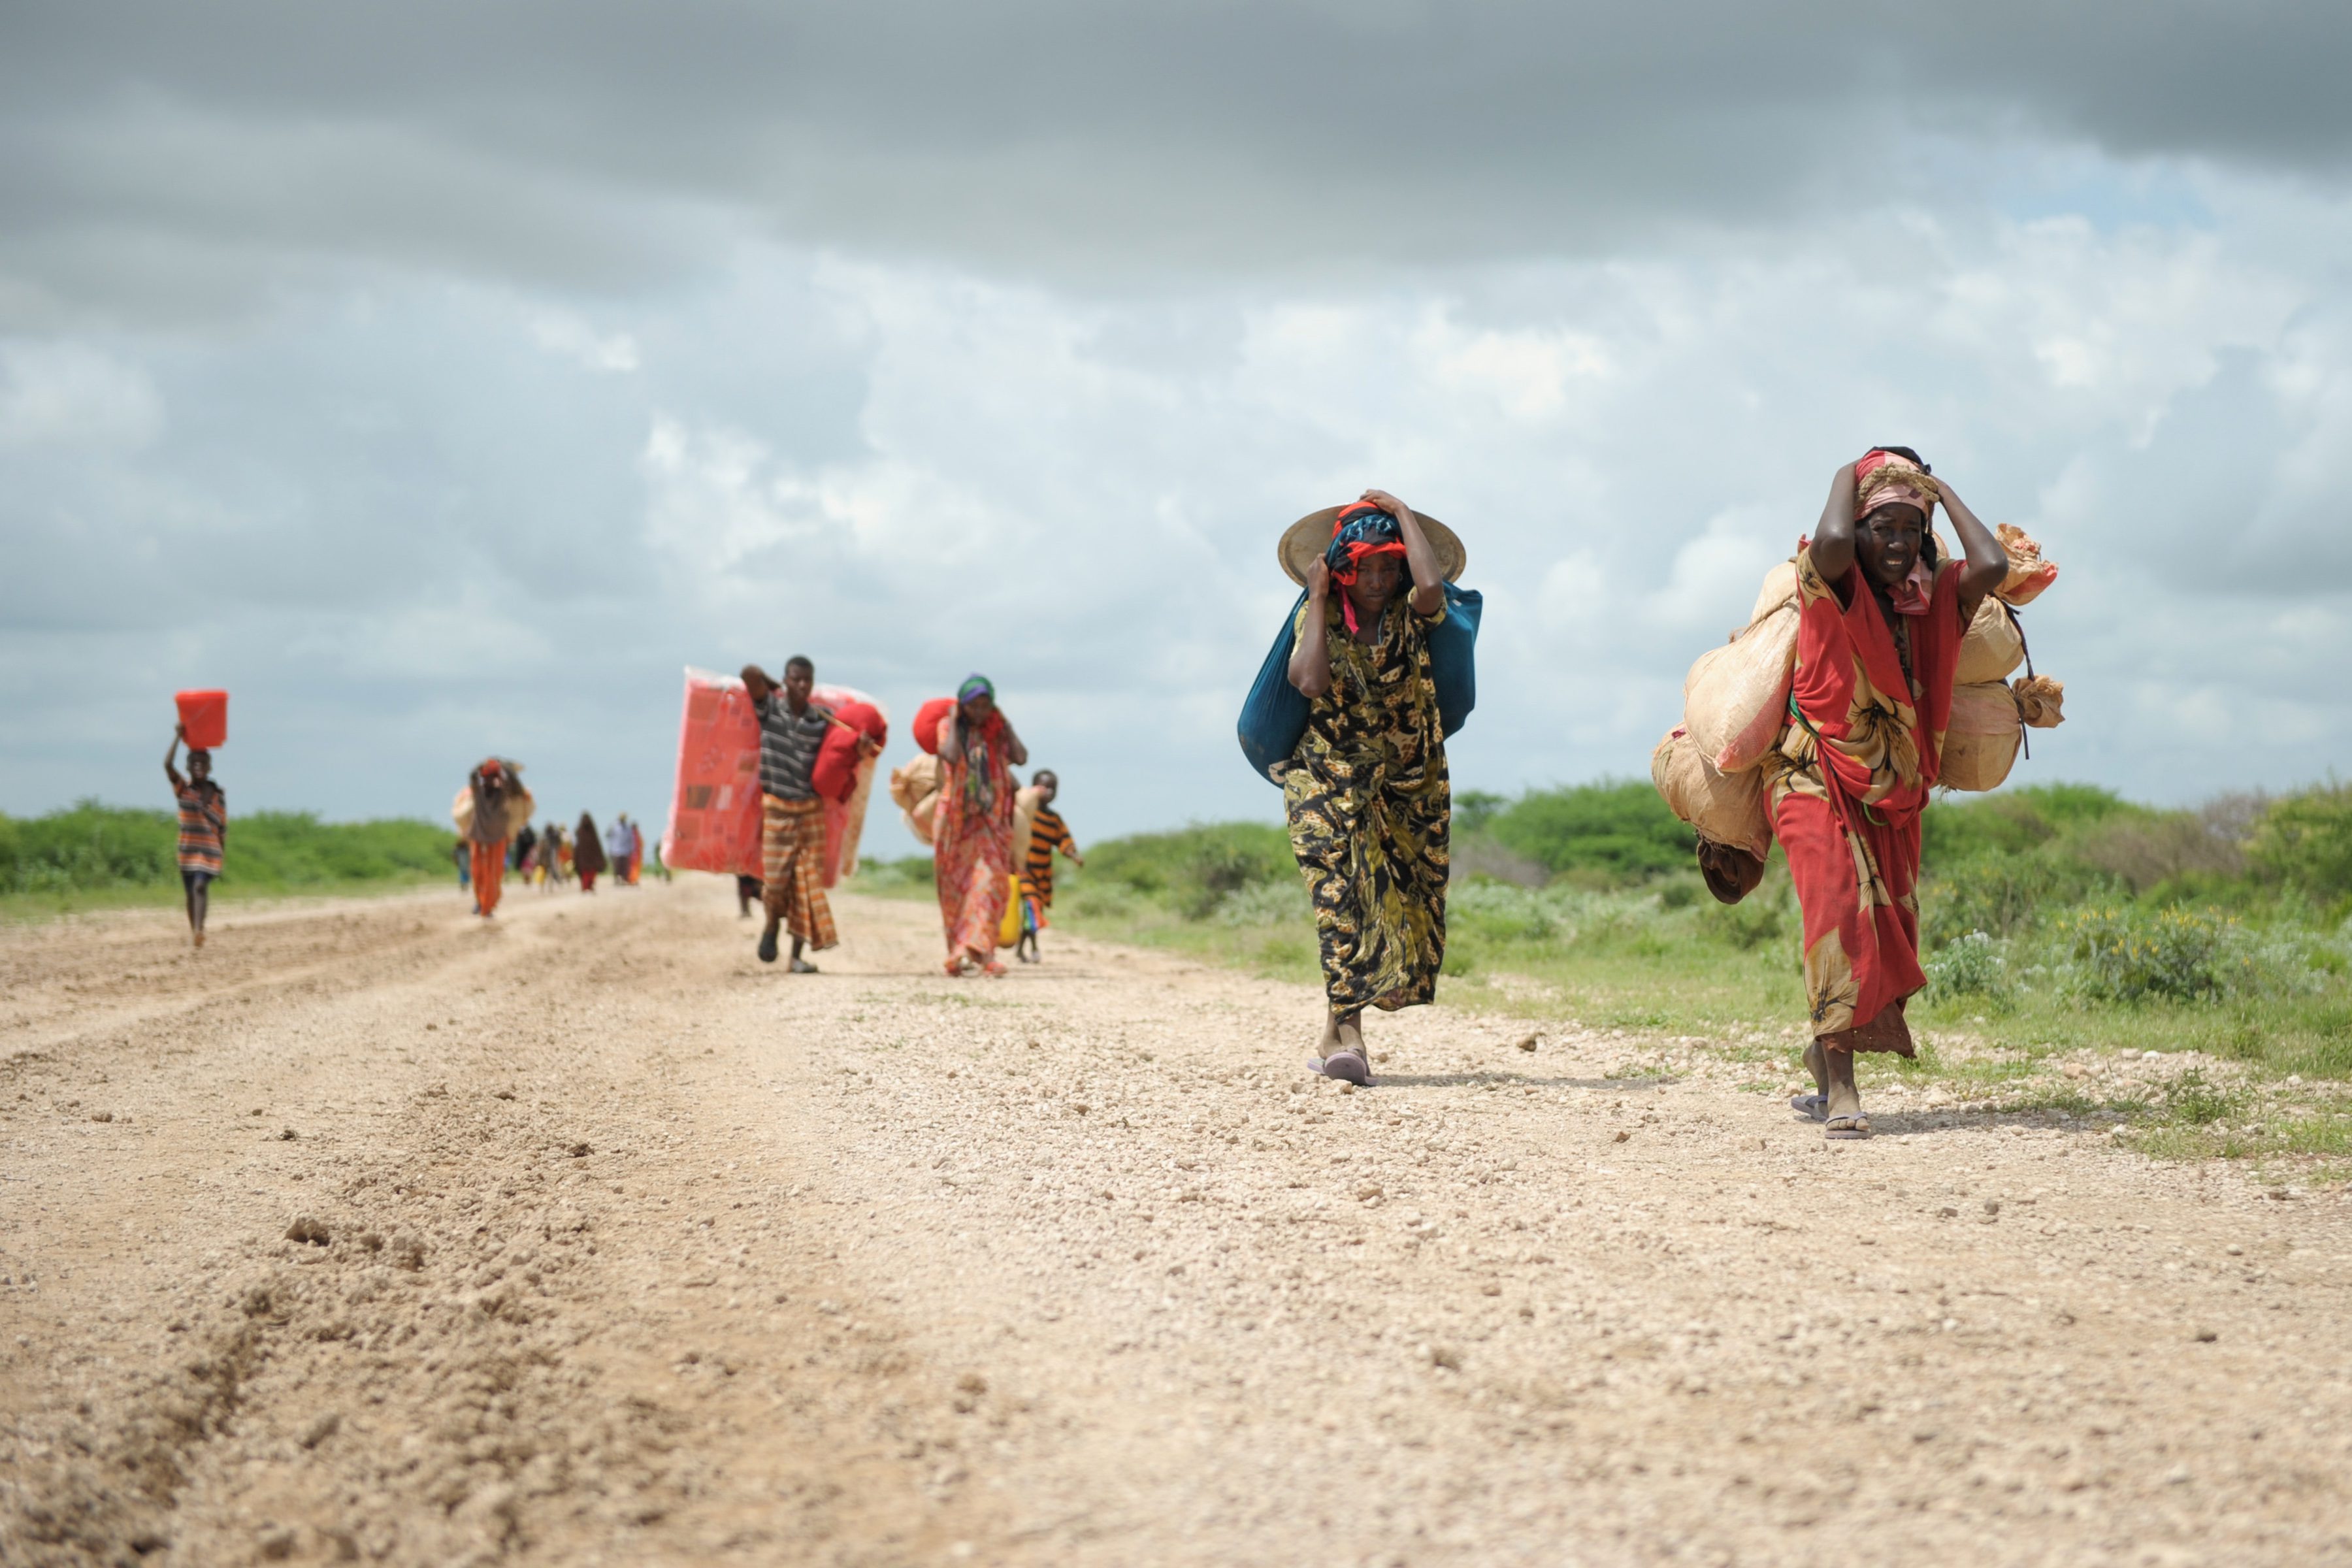 Carrying whatever possessions they can, women arrive in a steady trickle at a camp for internally displaced people established next to a base of the African Union Mission for Somalia (AMISOM) near Jowhar. UN photo